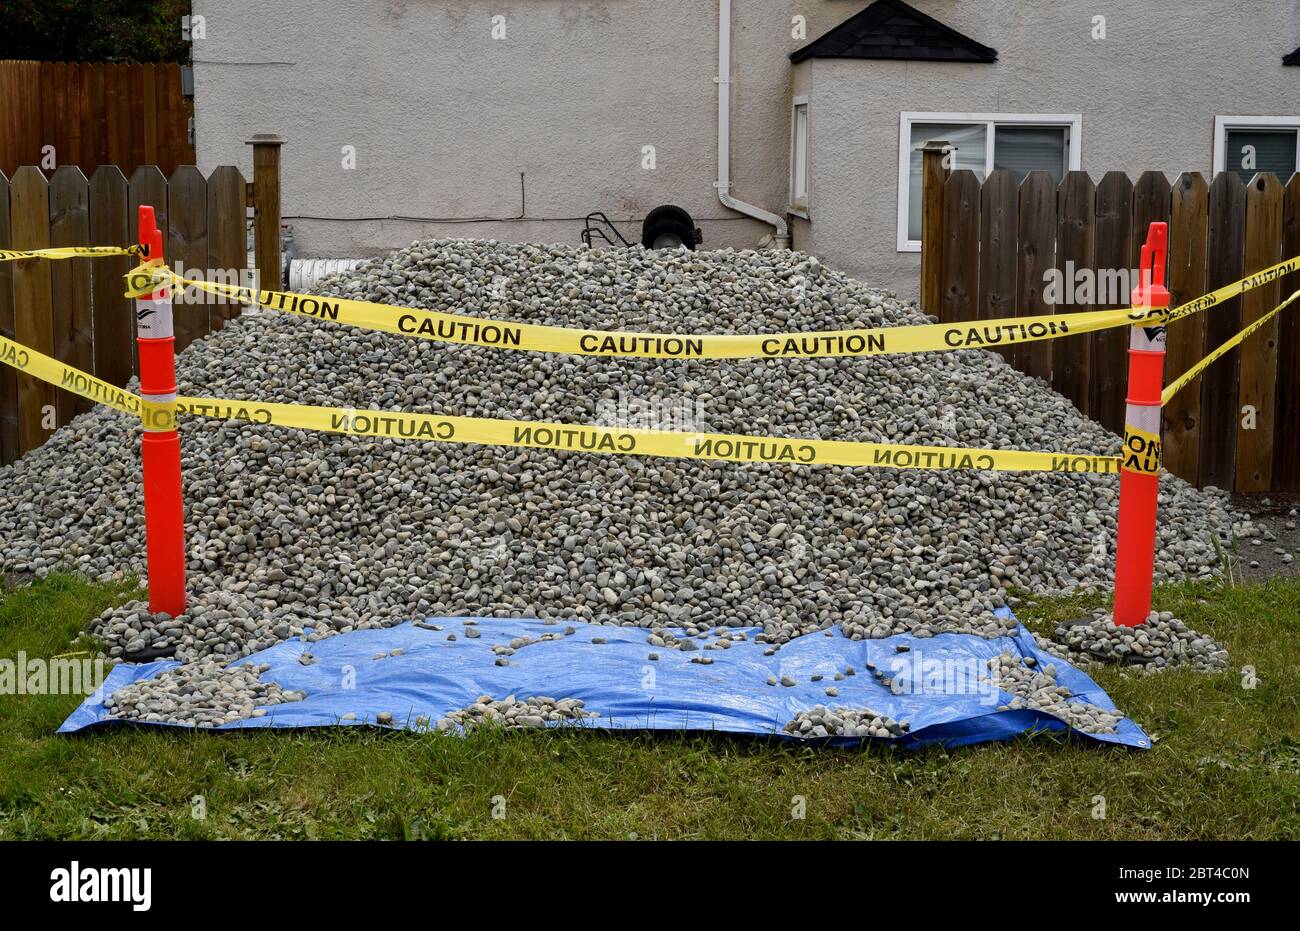 Caution tape surrounds a pile of gravel sittting on a blue tarp in front of a suburban house and yard. The small stones can be used for fill, drainage Stock Photo